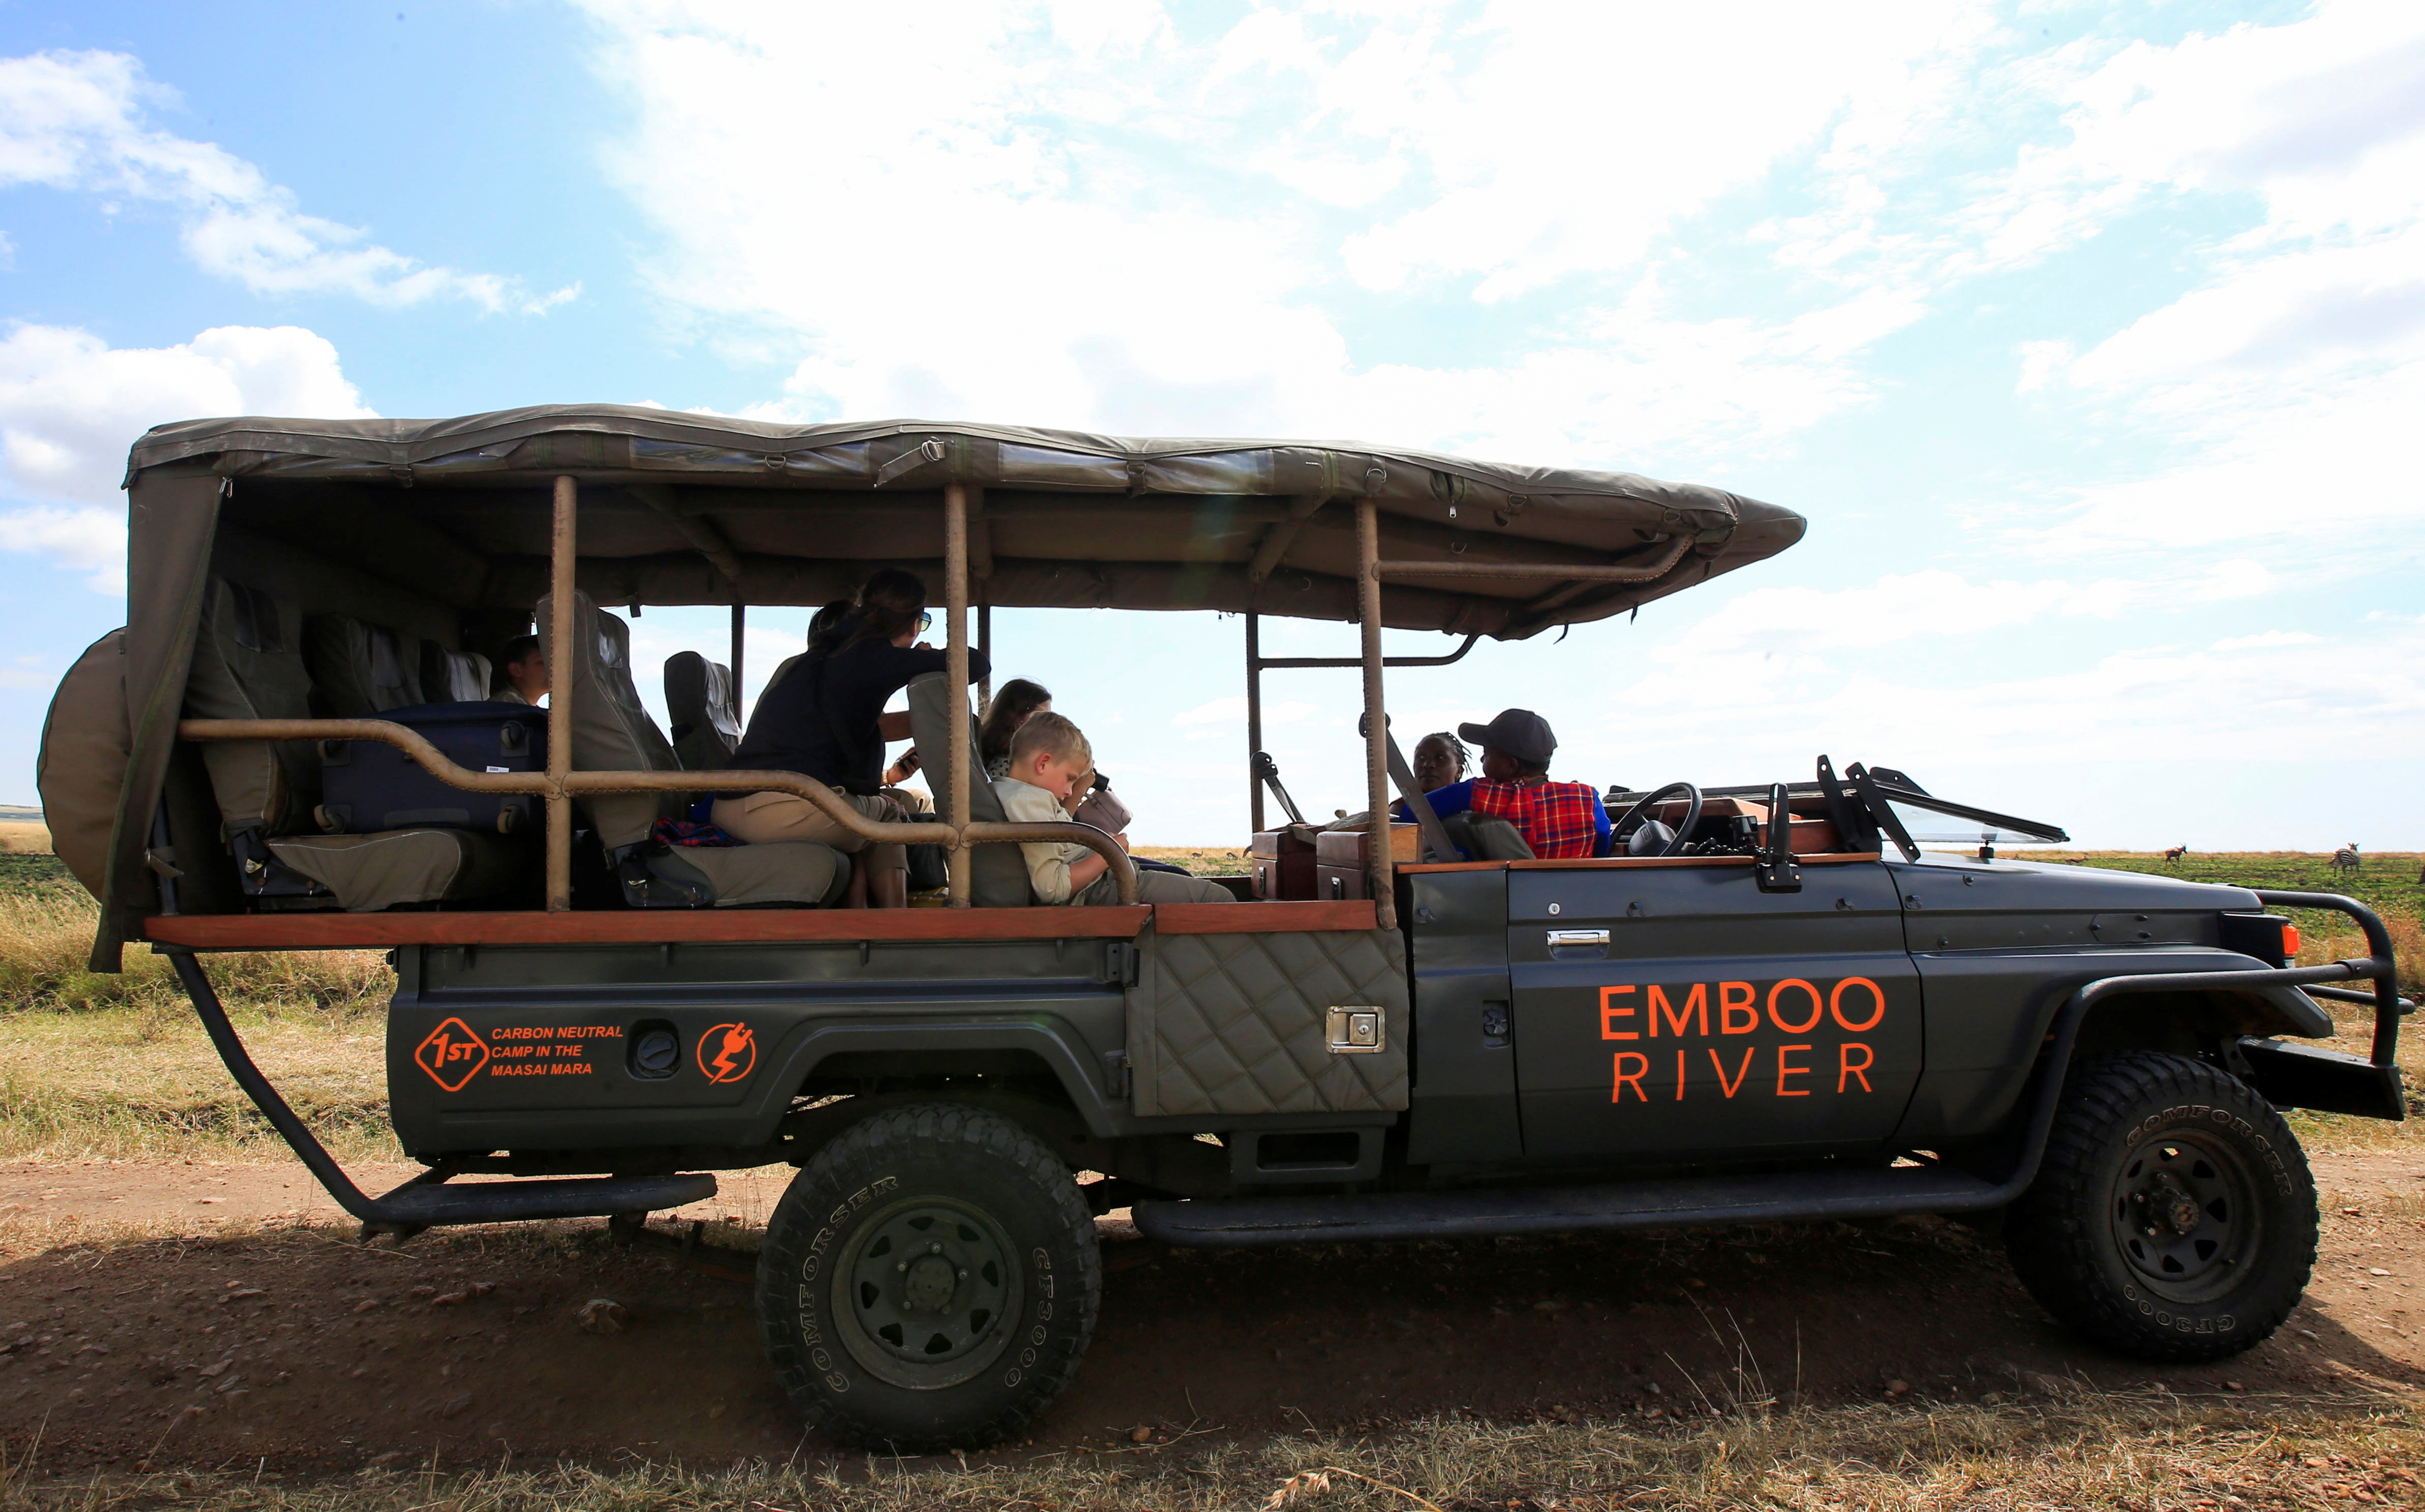 Eco-friendly vehicles offer quieter, cleaner safaris in Kenyan reserve